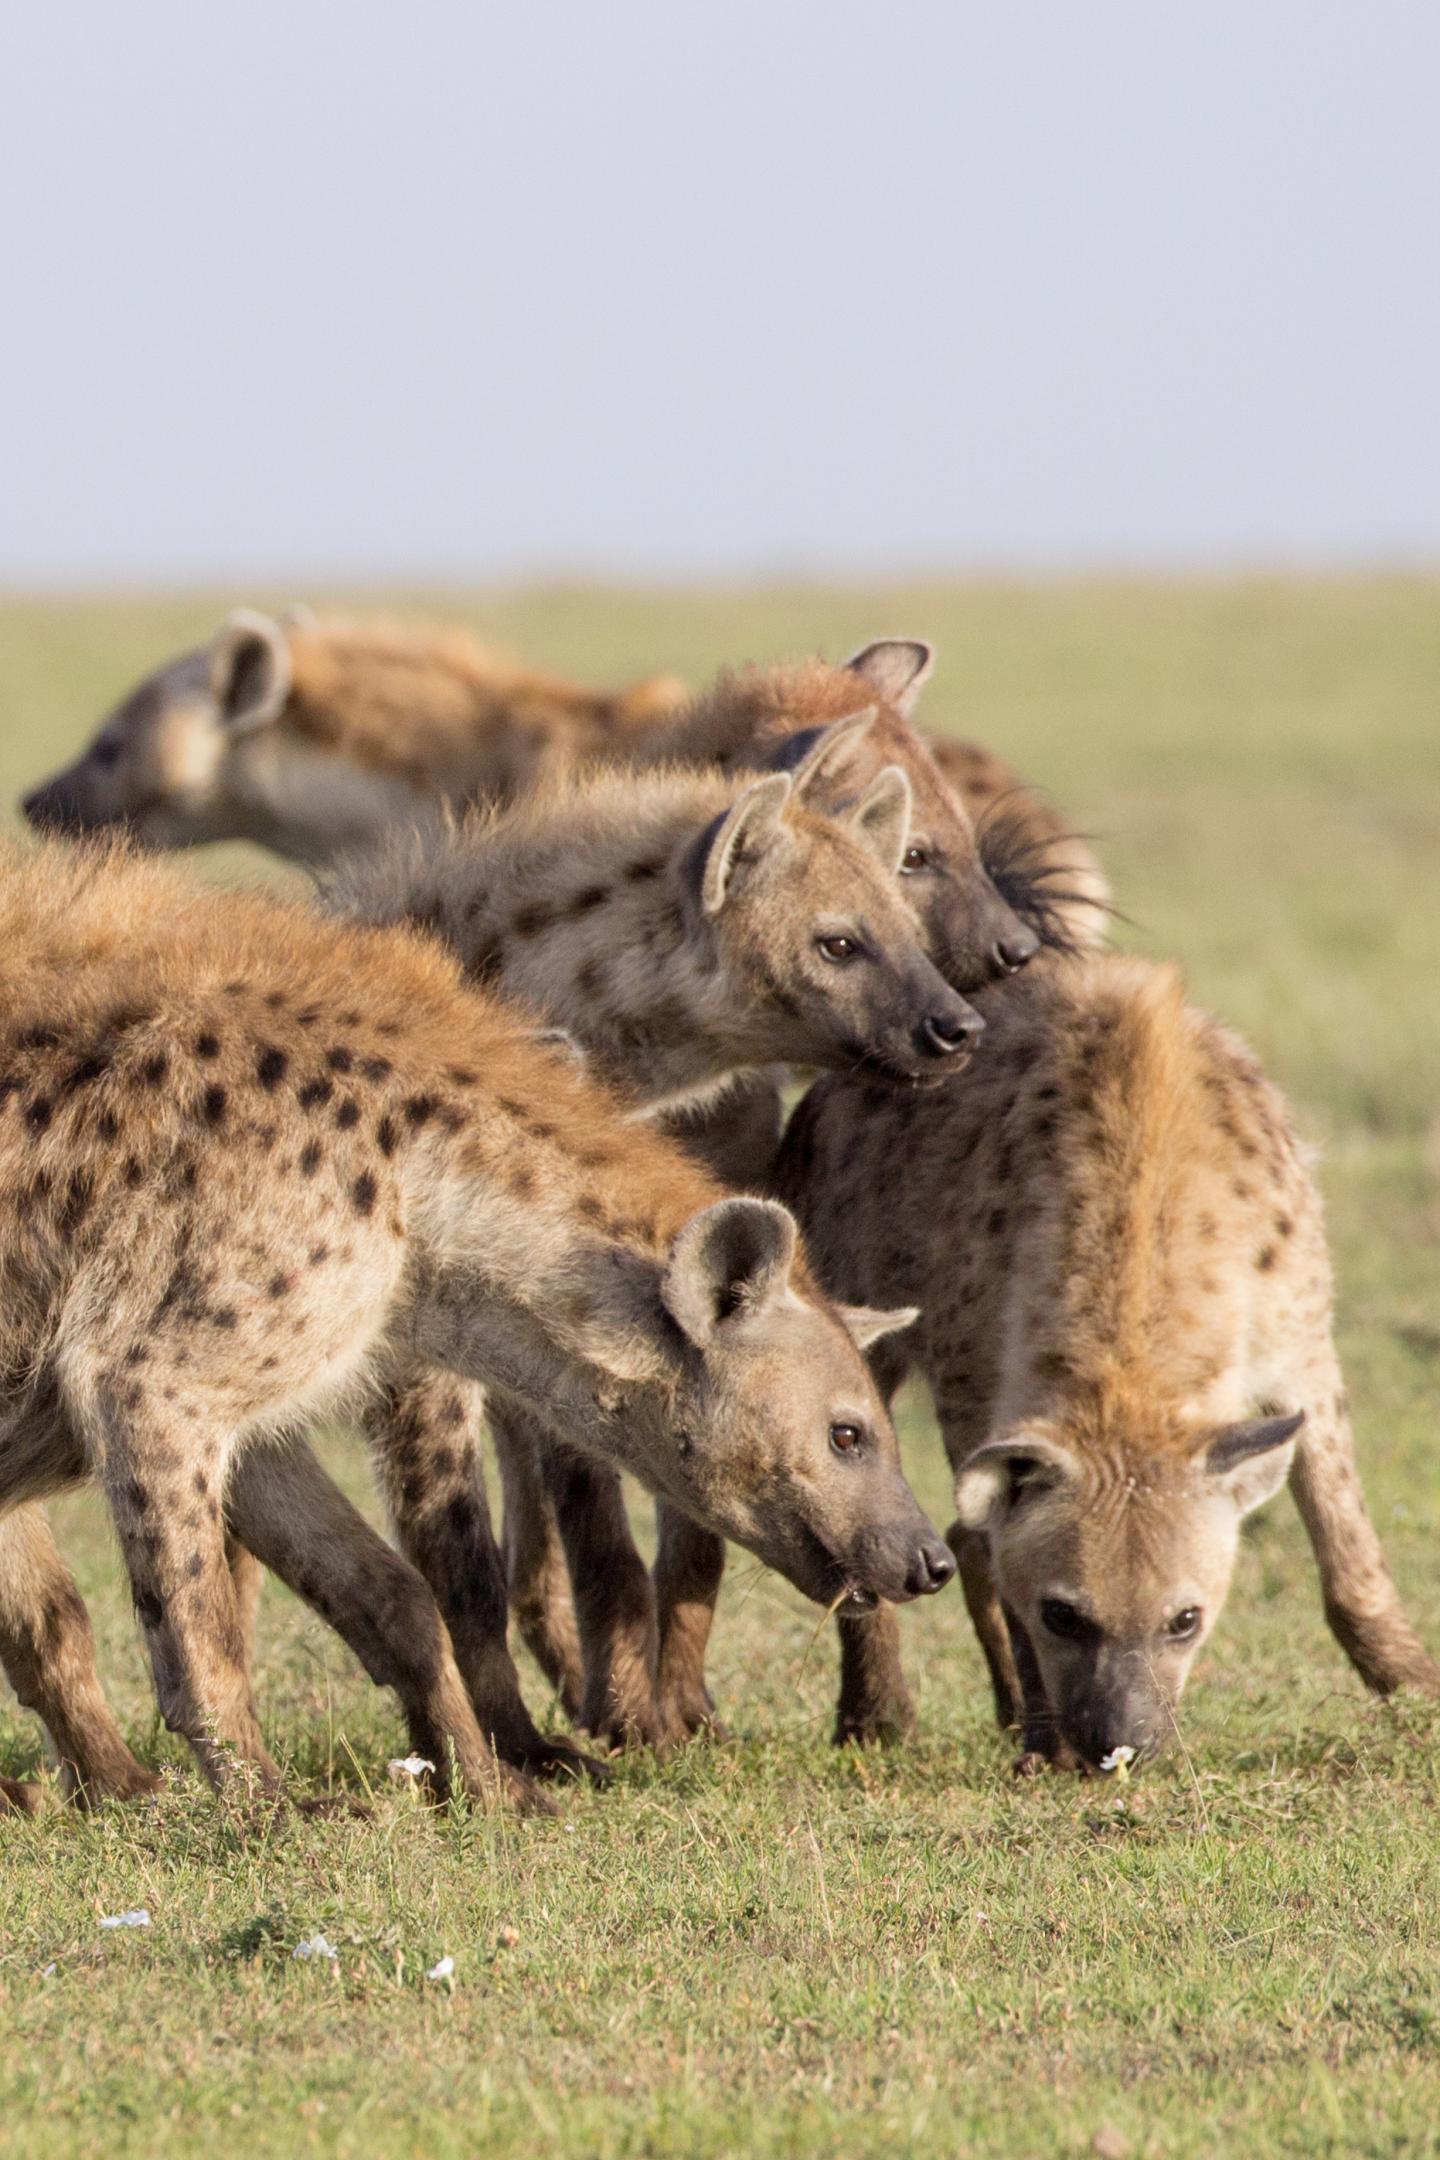 Hyena moms pass their networks to their kids